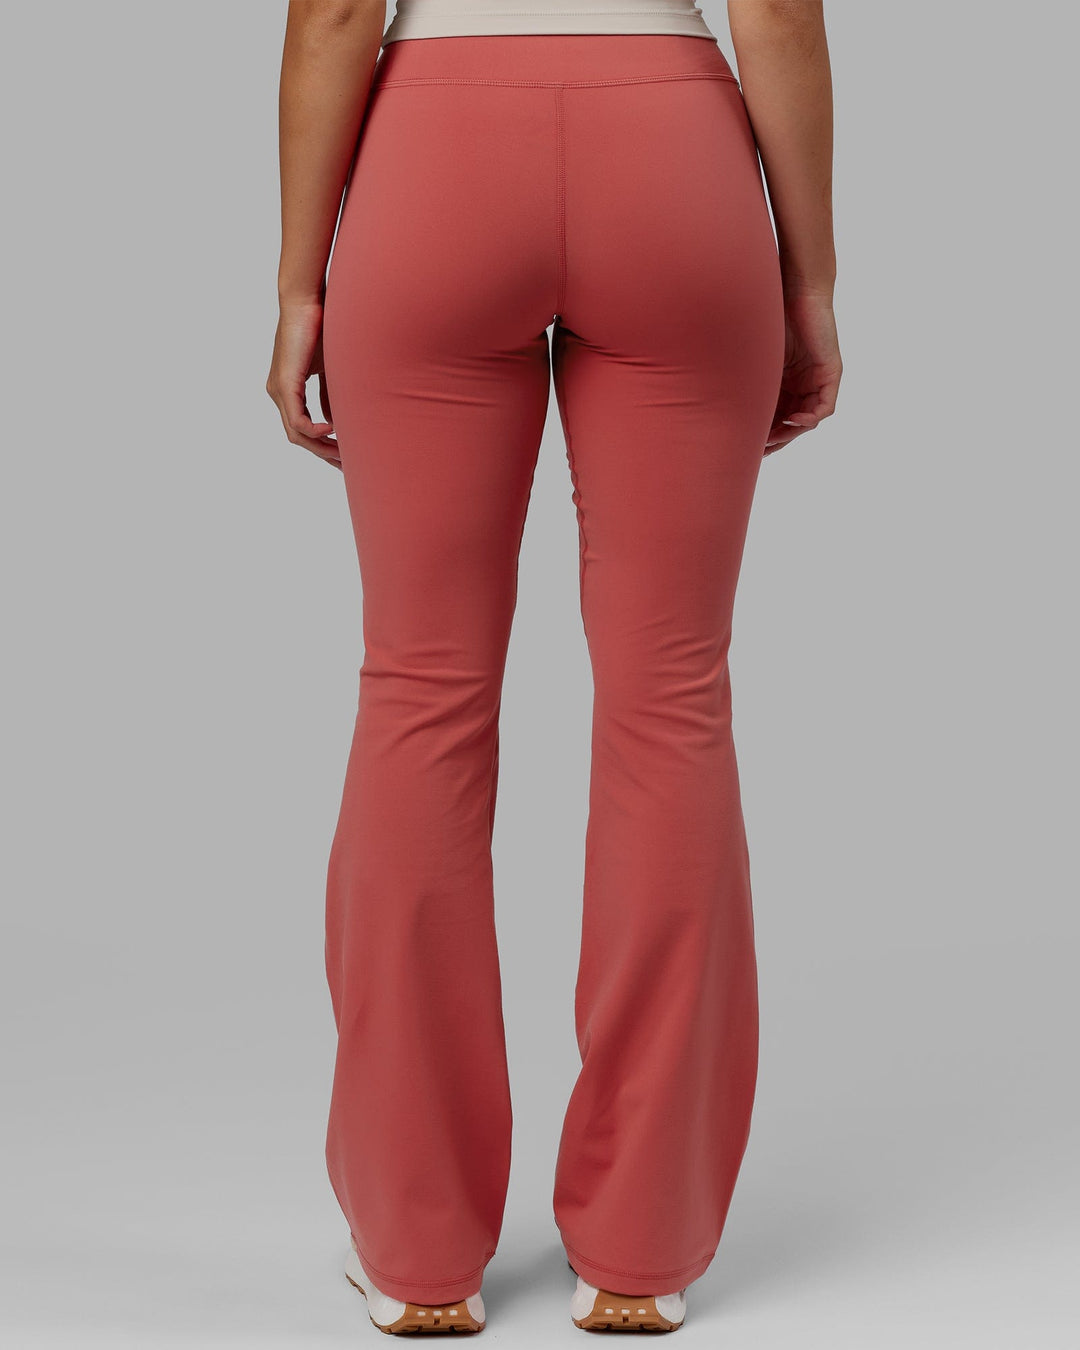 Woman wearing Everyday Flare Leggings - Mineral Red